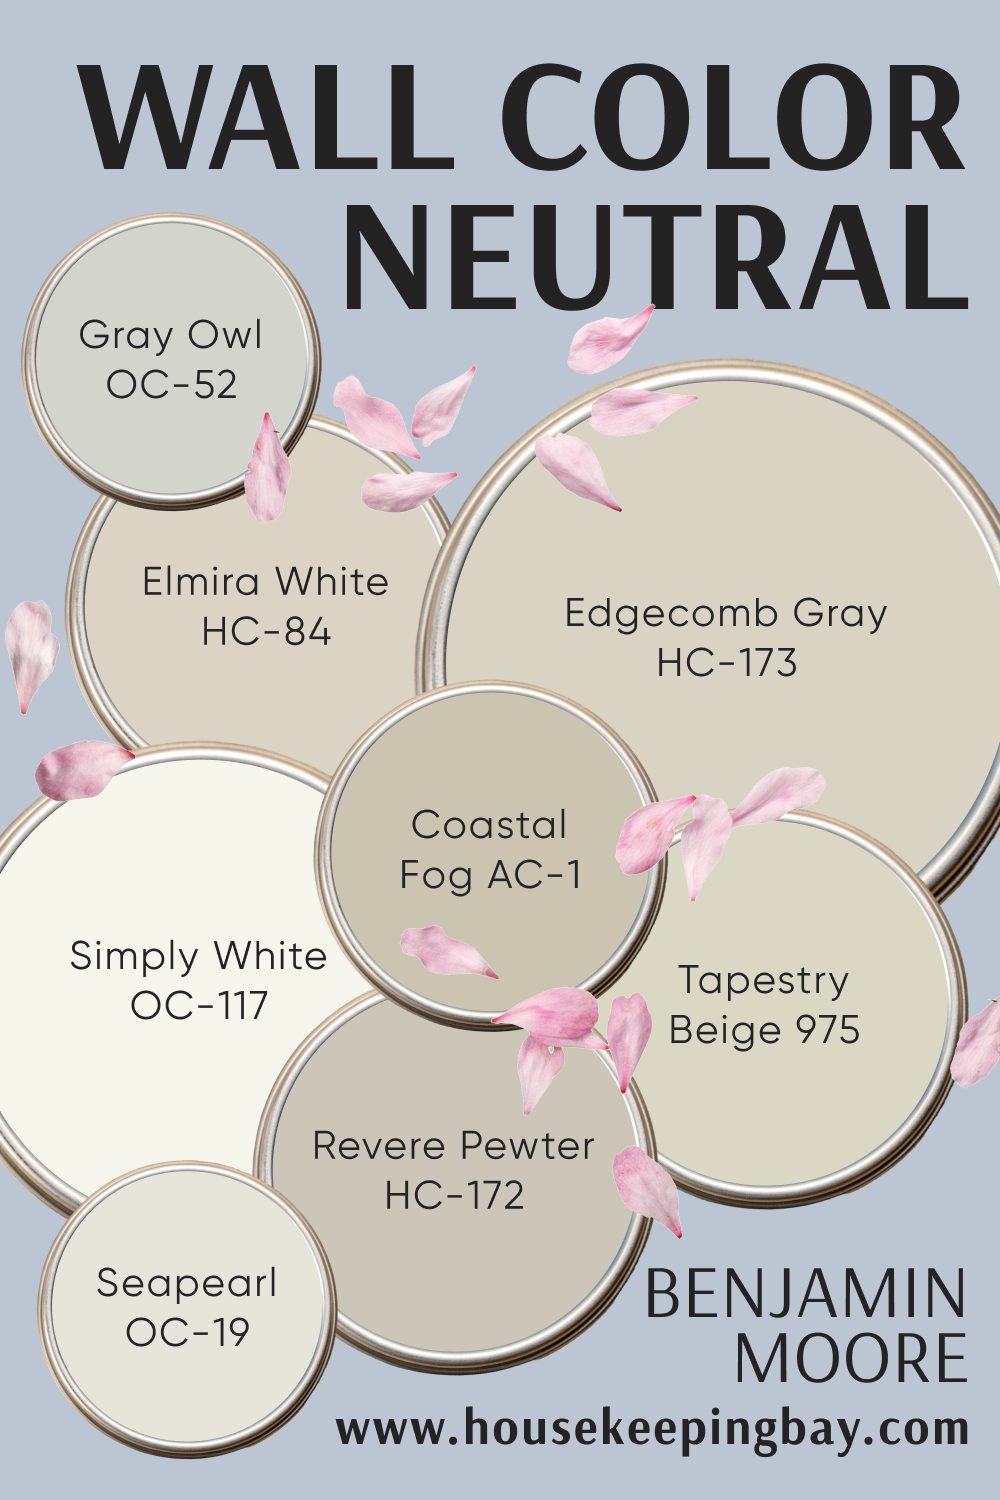 Wall Color Neutral